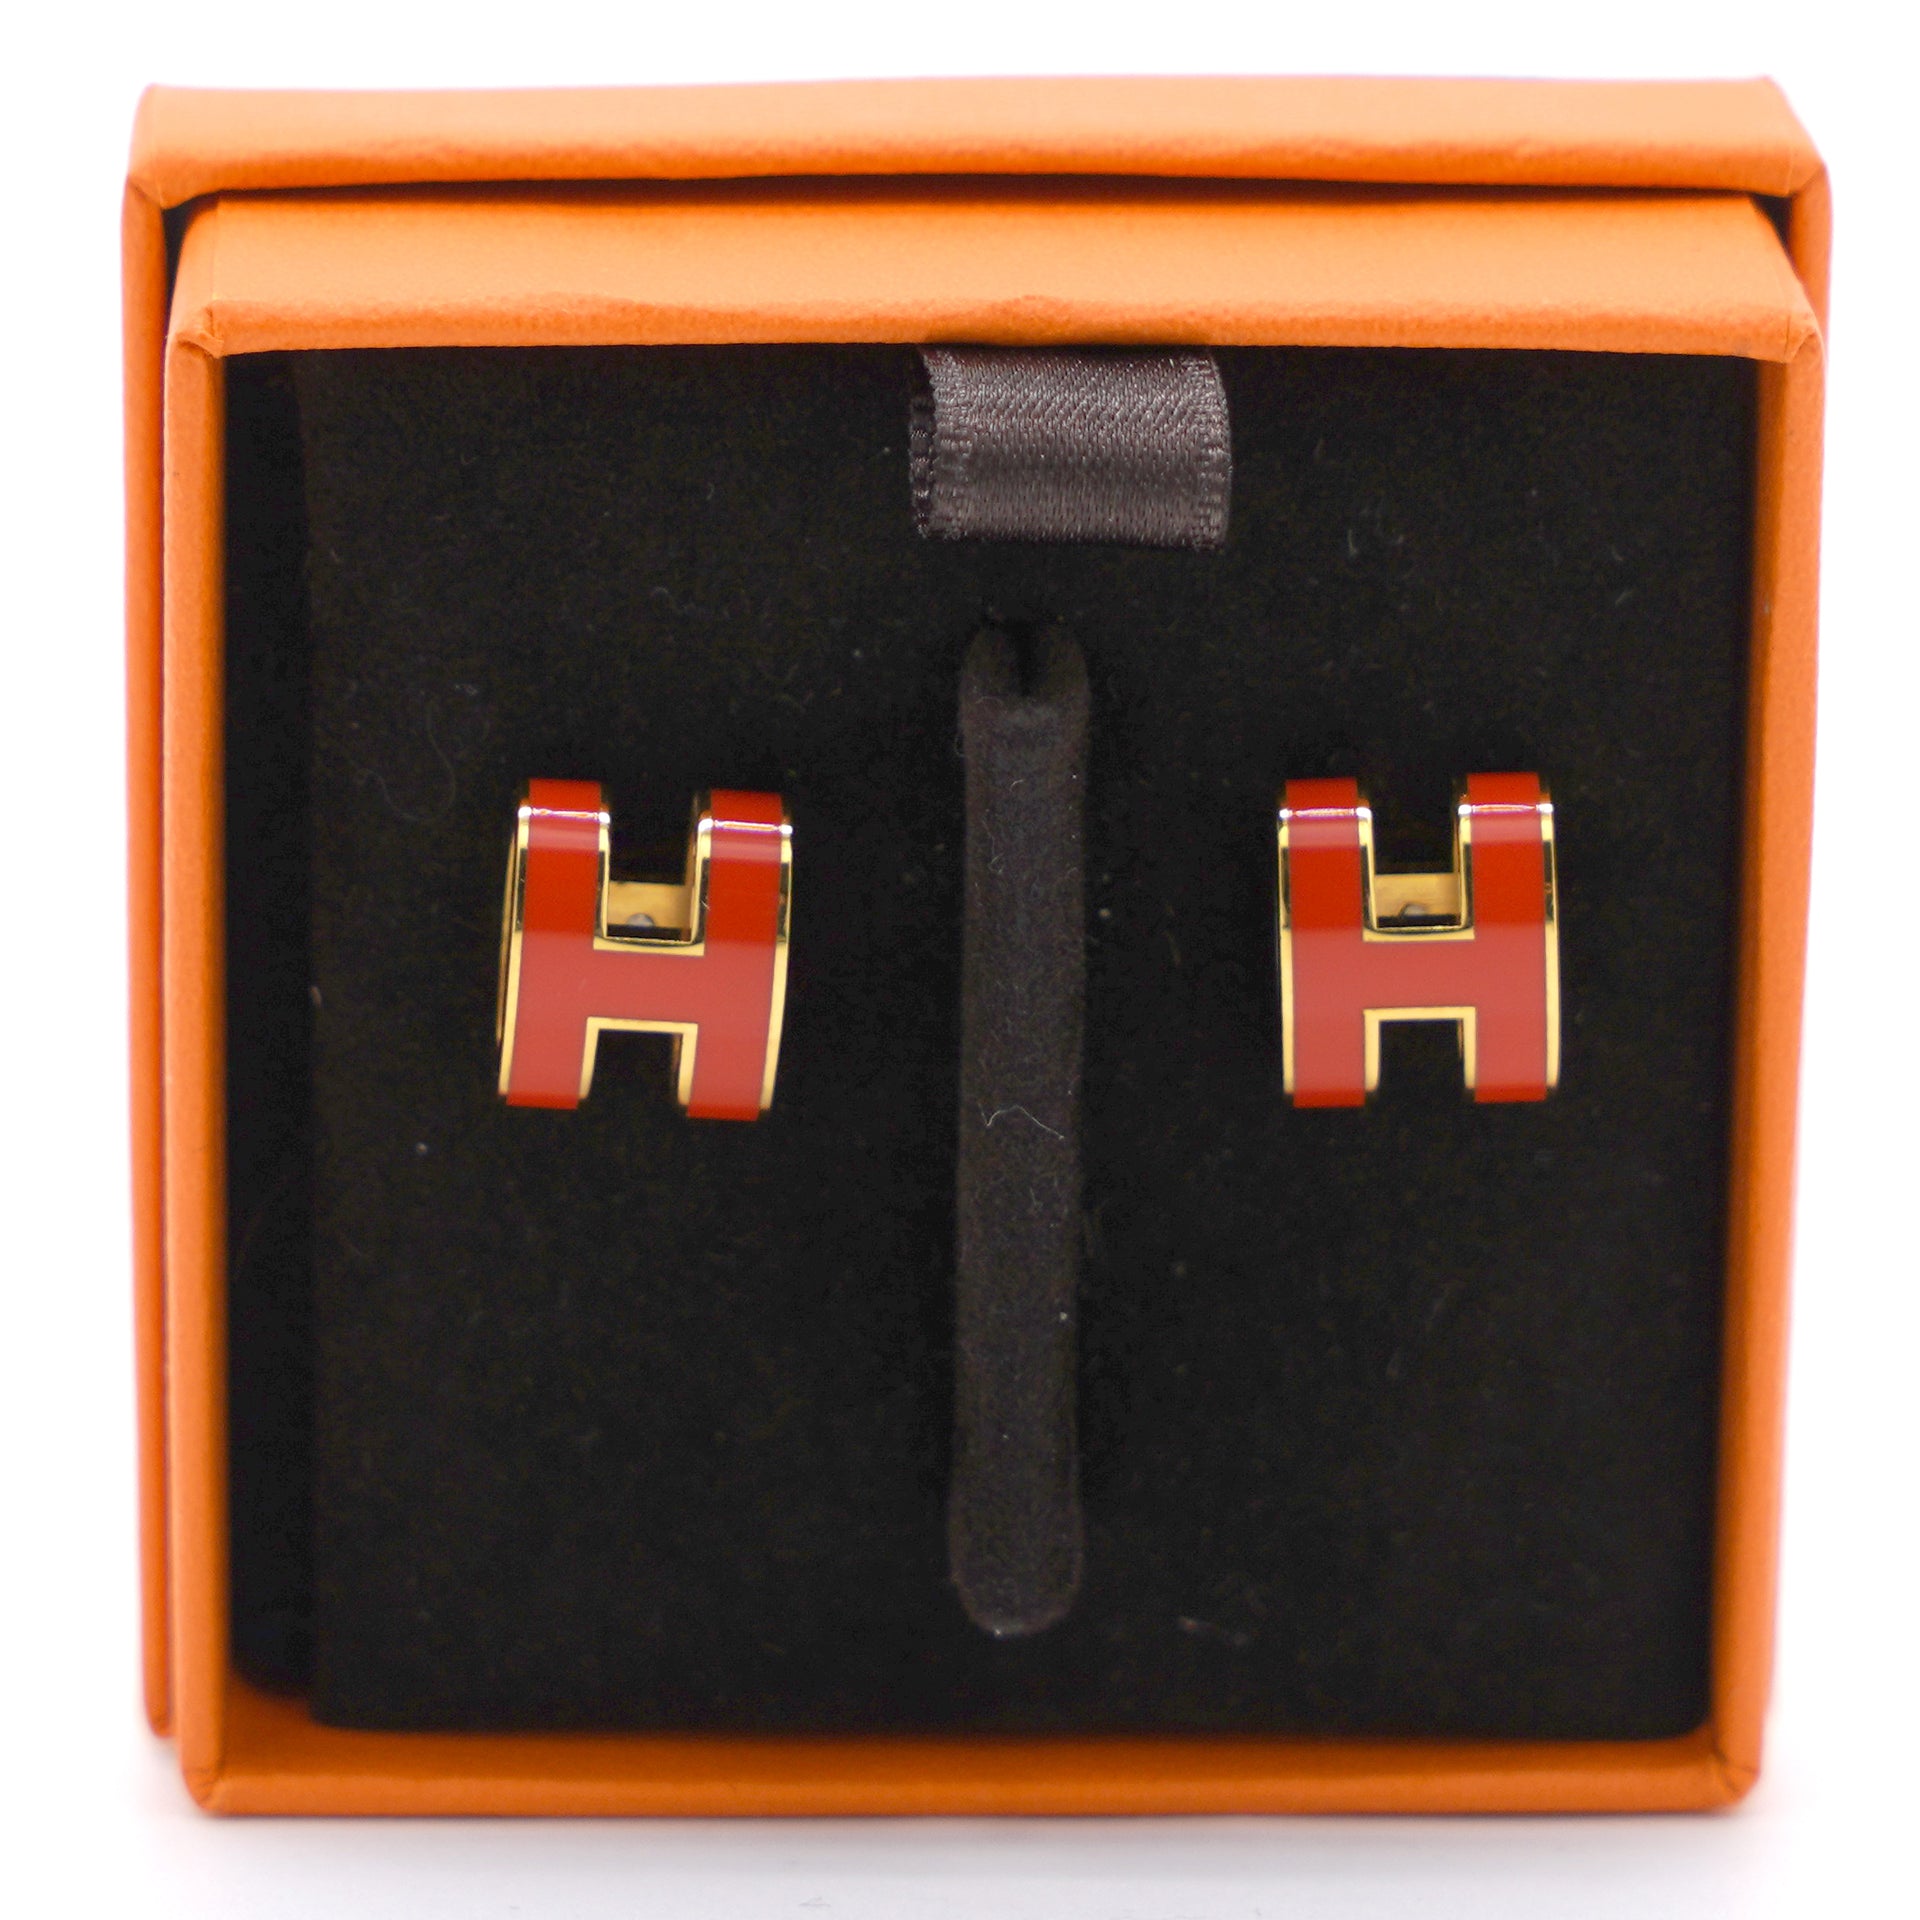 Lacquered Pop H Earrings Red